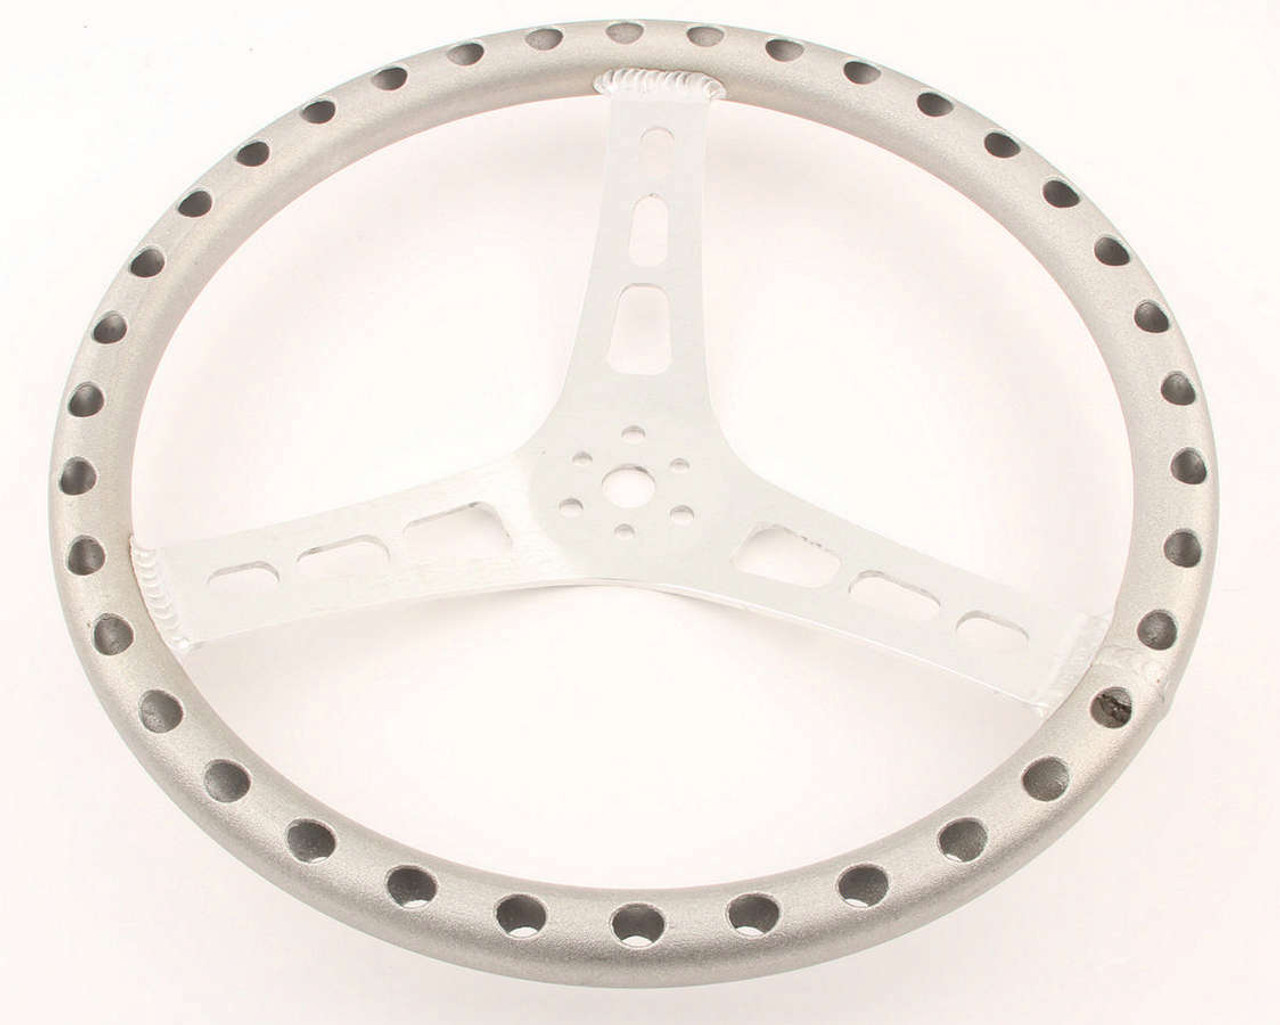 14in Dished Steering Wheel Aluminum